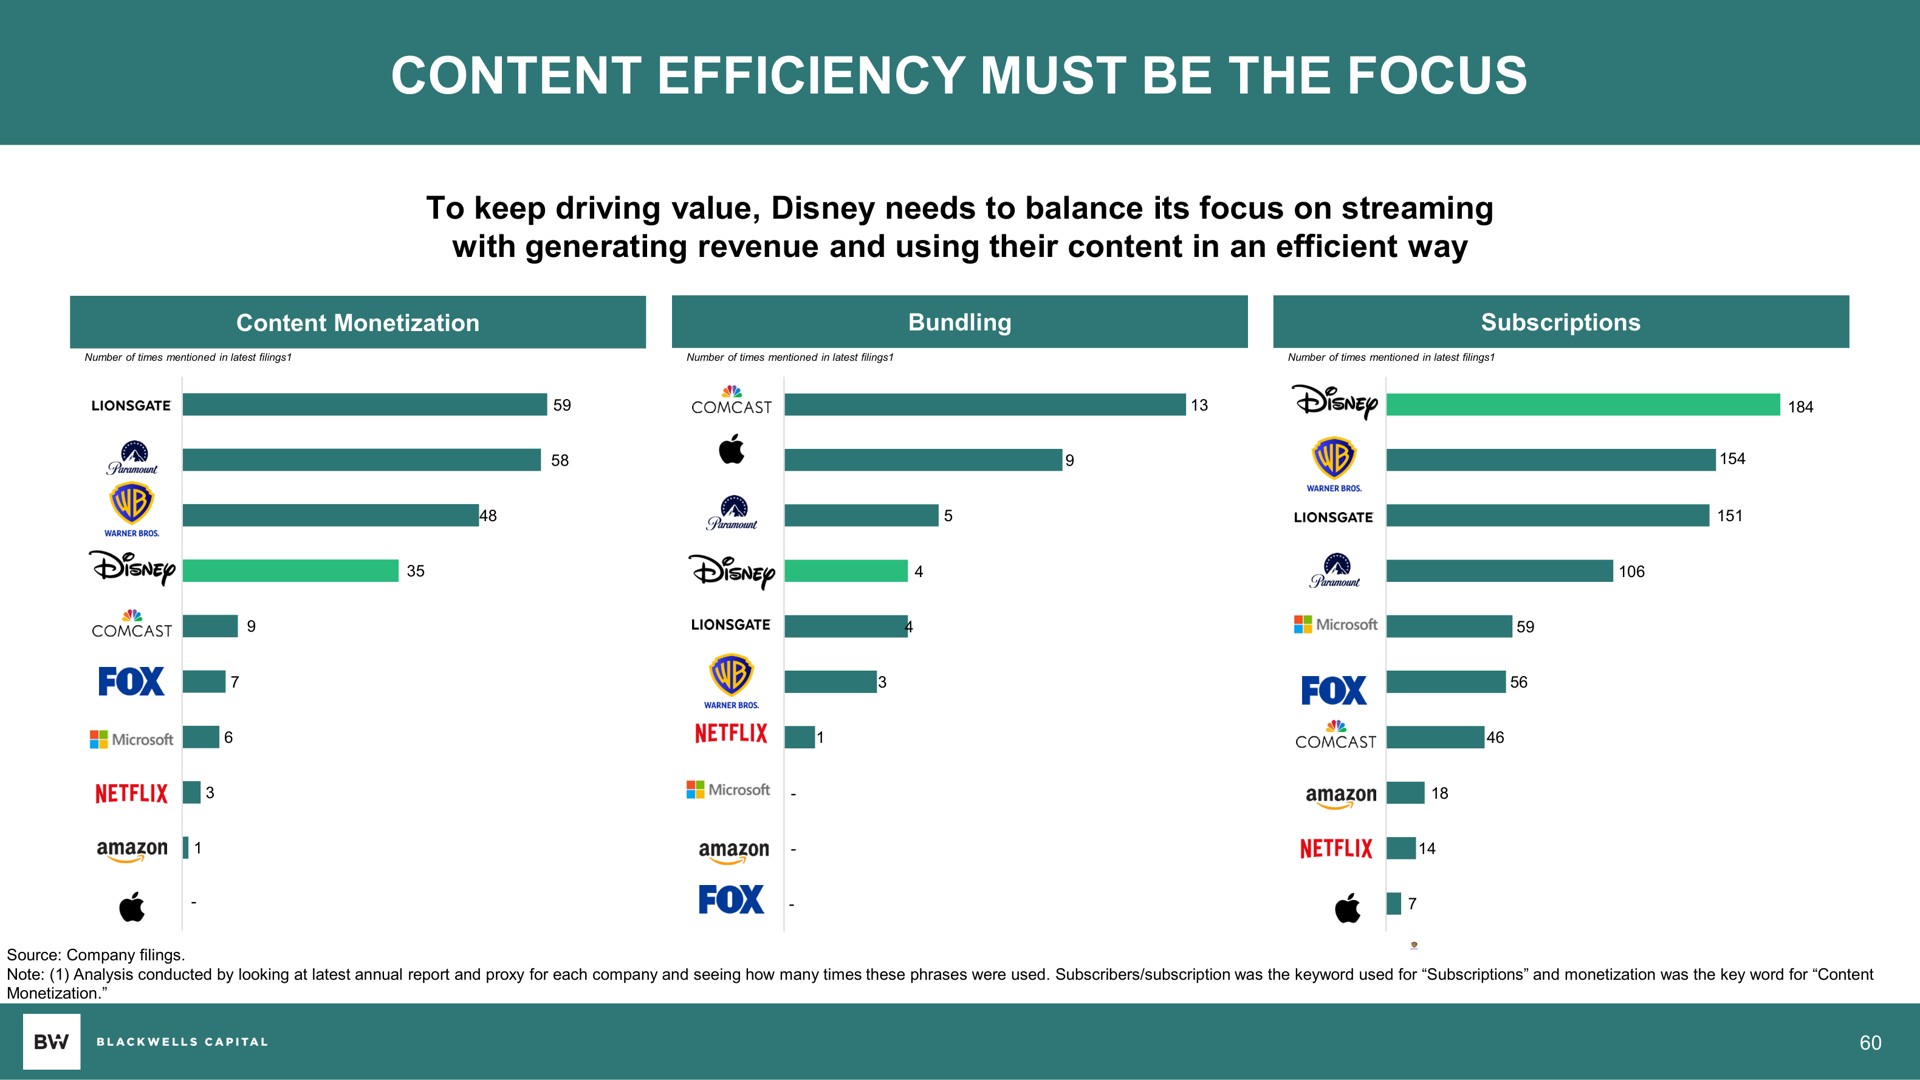 content efficiency must be the focus | Blackwells Capital